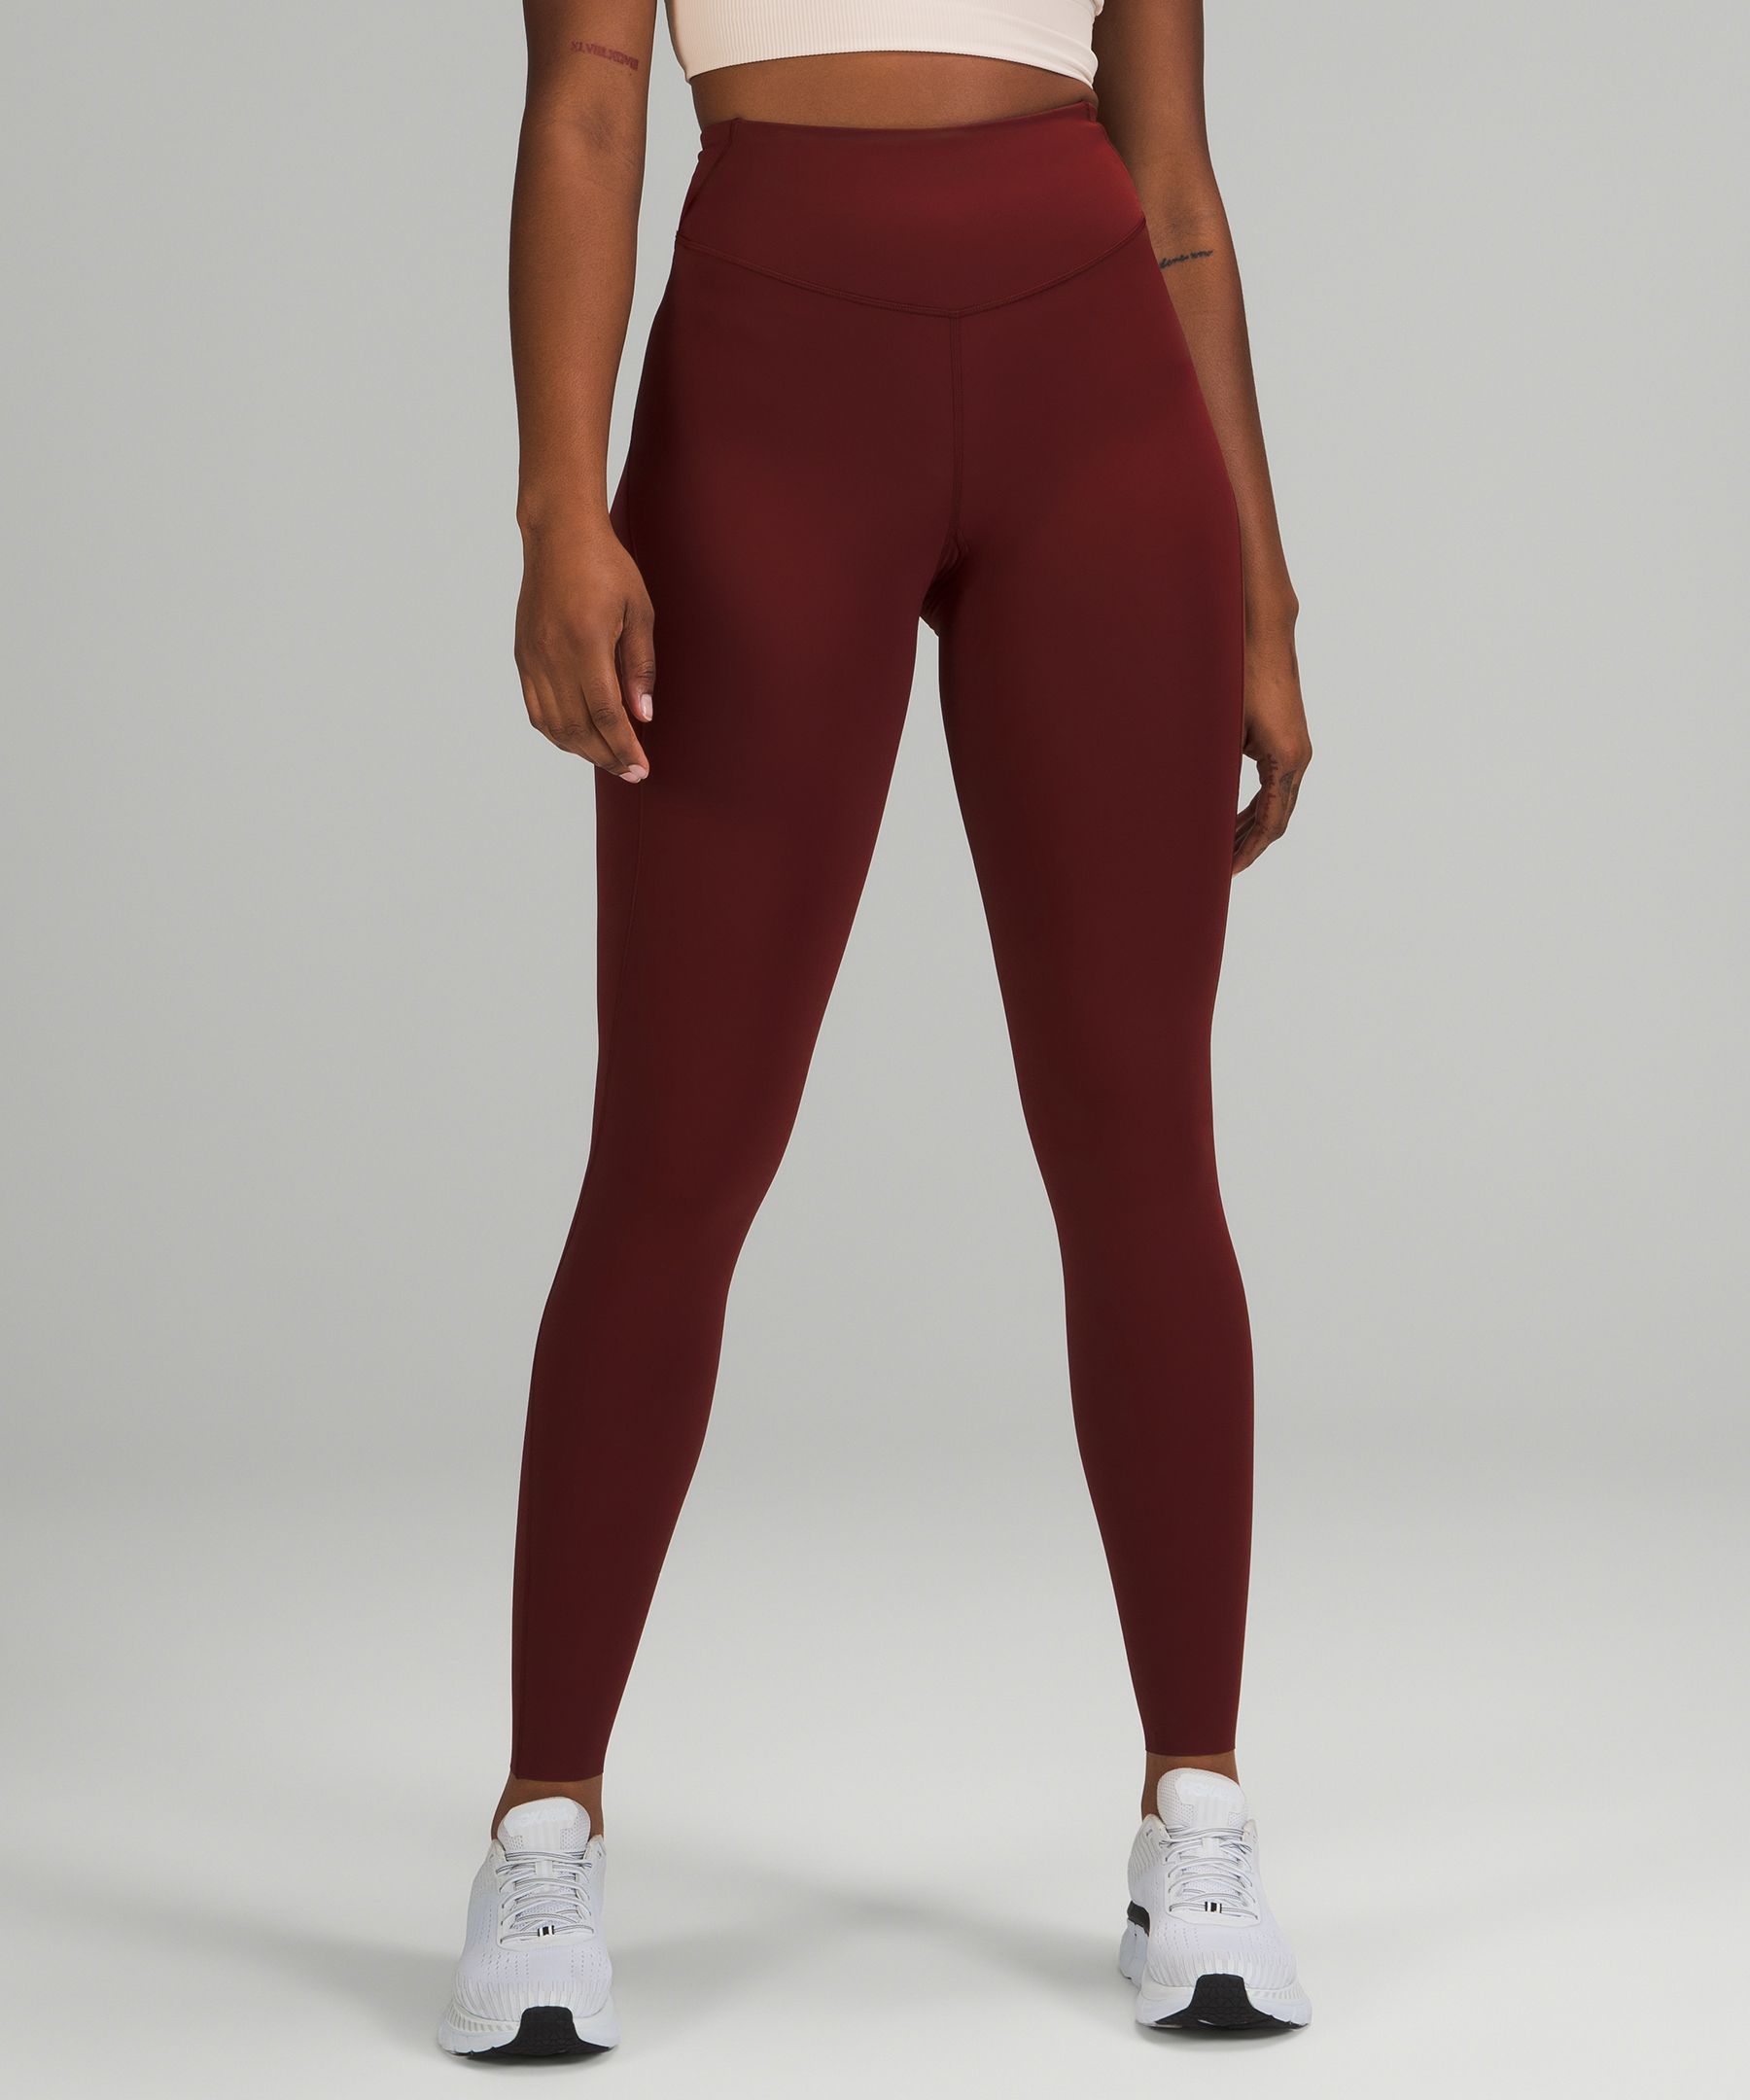 Lululemon Base Pace High-rise Running Tights 31" In Red Merlot